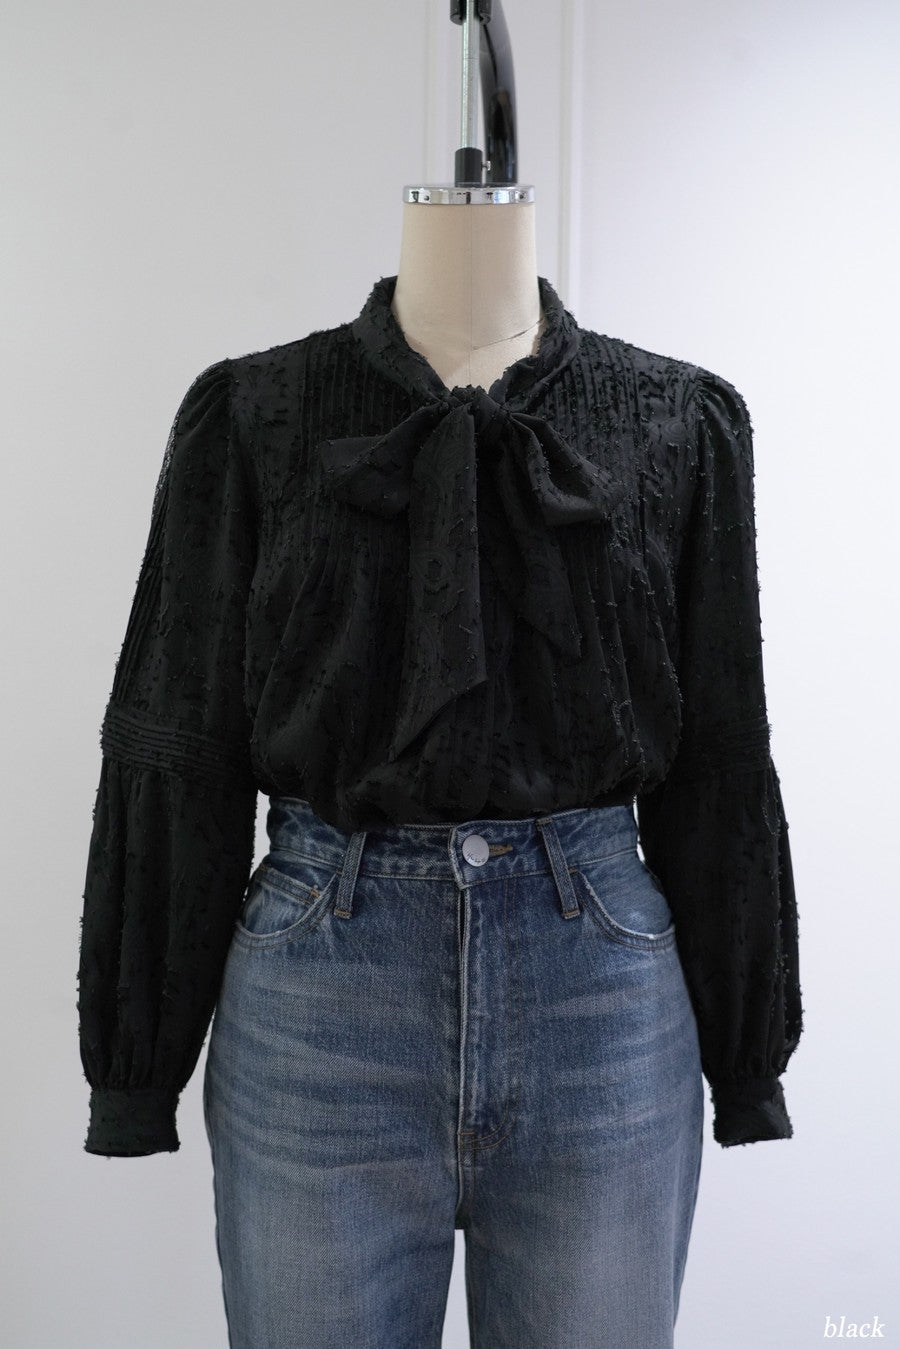 Her lip to - Lace Trimming Cotton Blouse herliptoの+inforsante.fr